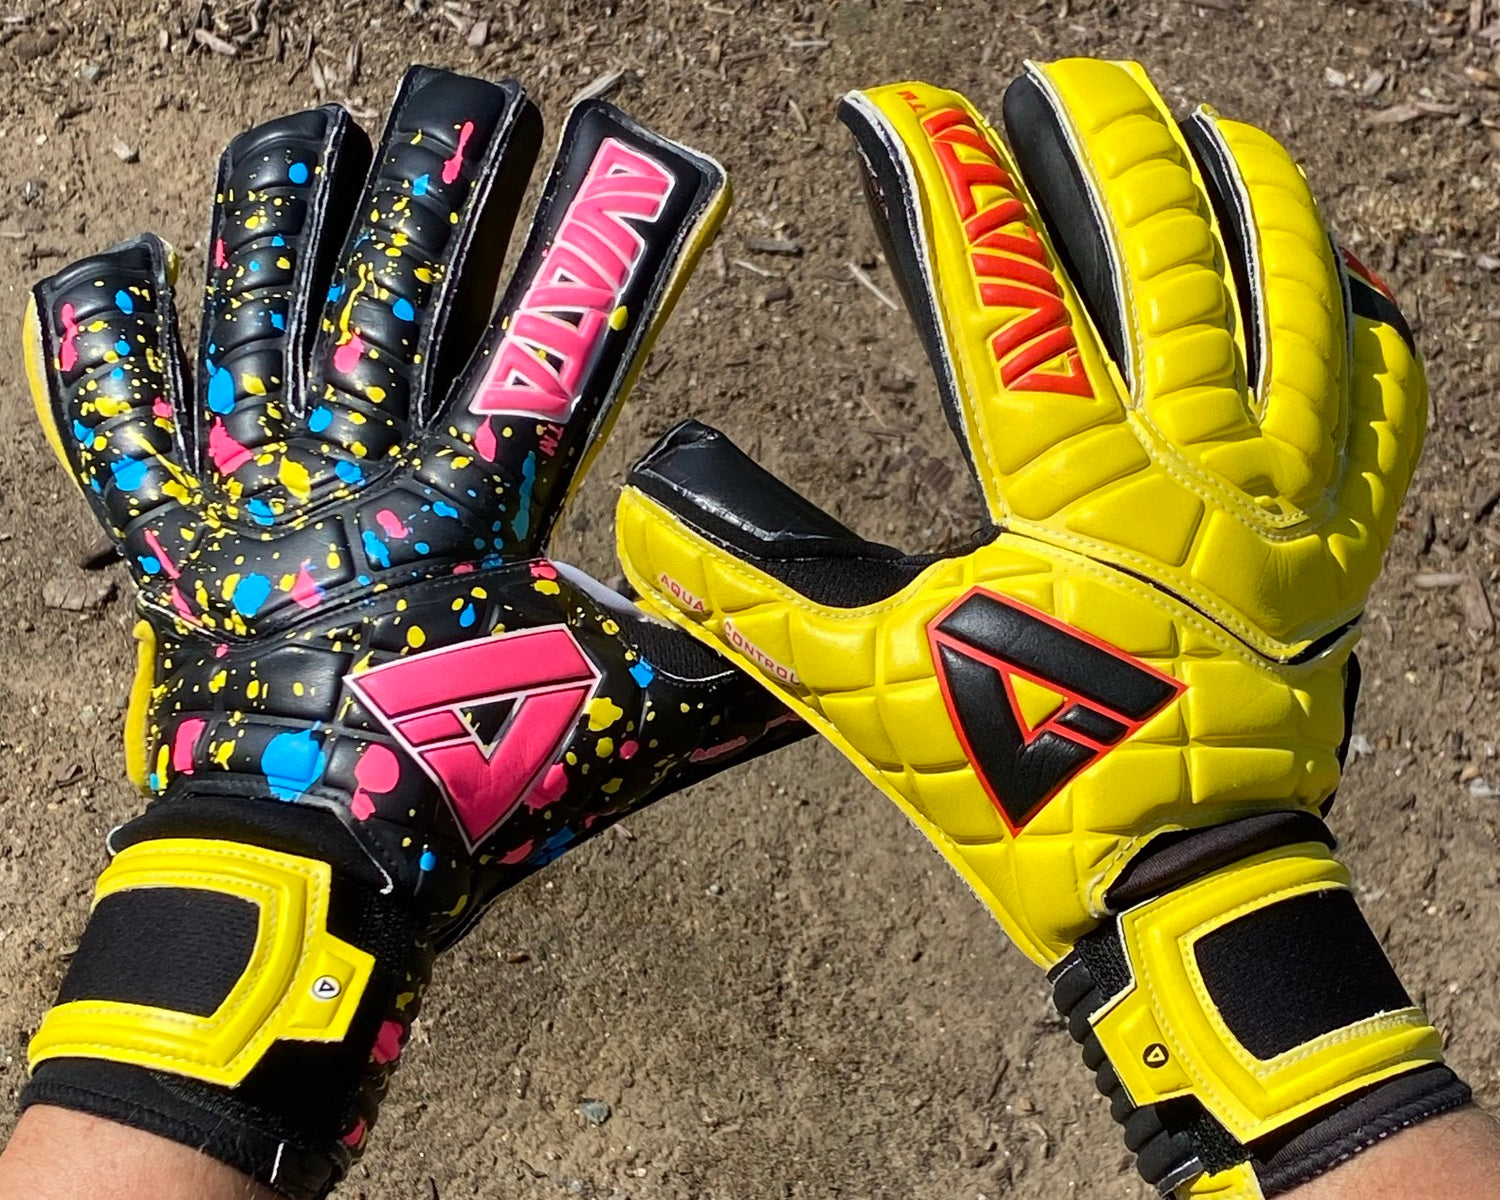 Best Tips For Picking Your Next Pair of Goalkeeper Gloves